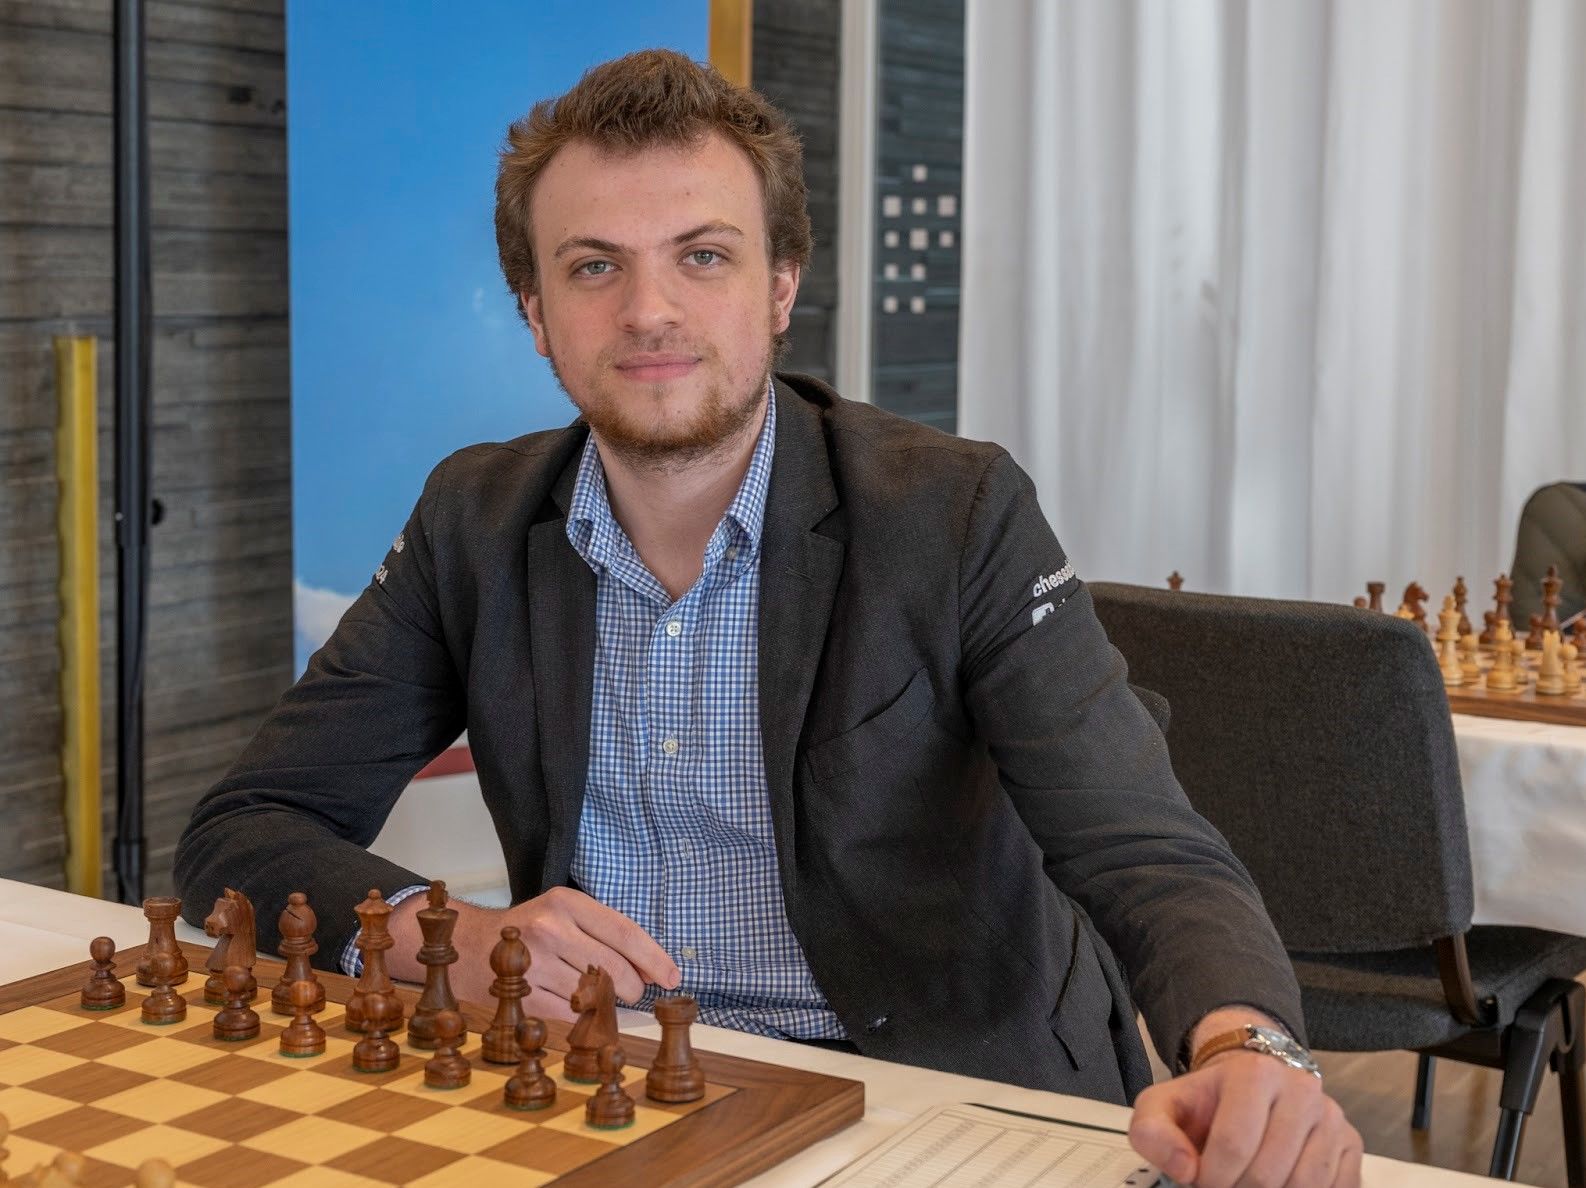 Chess grandmaster accused of cheating after being caught looking